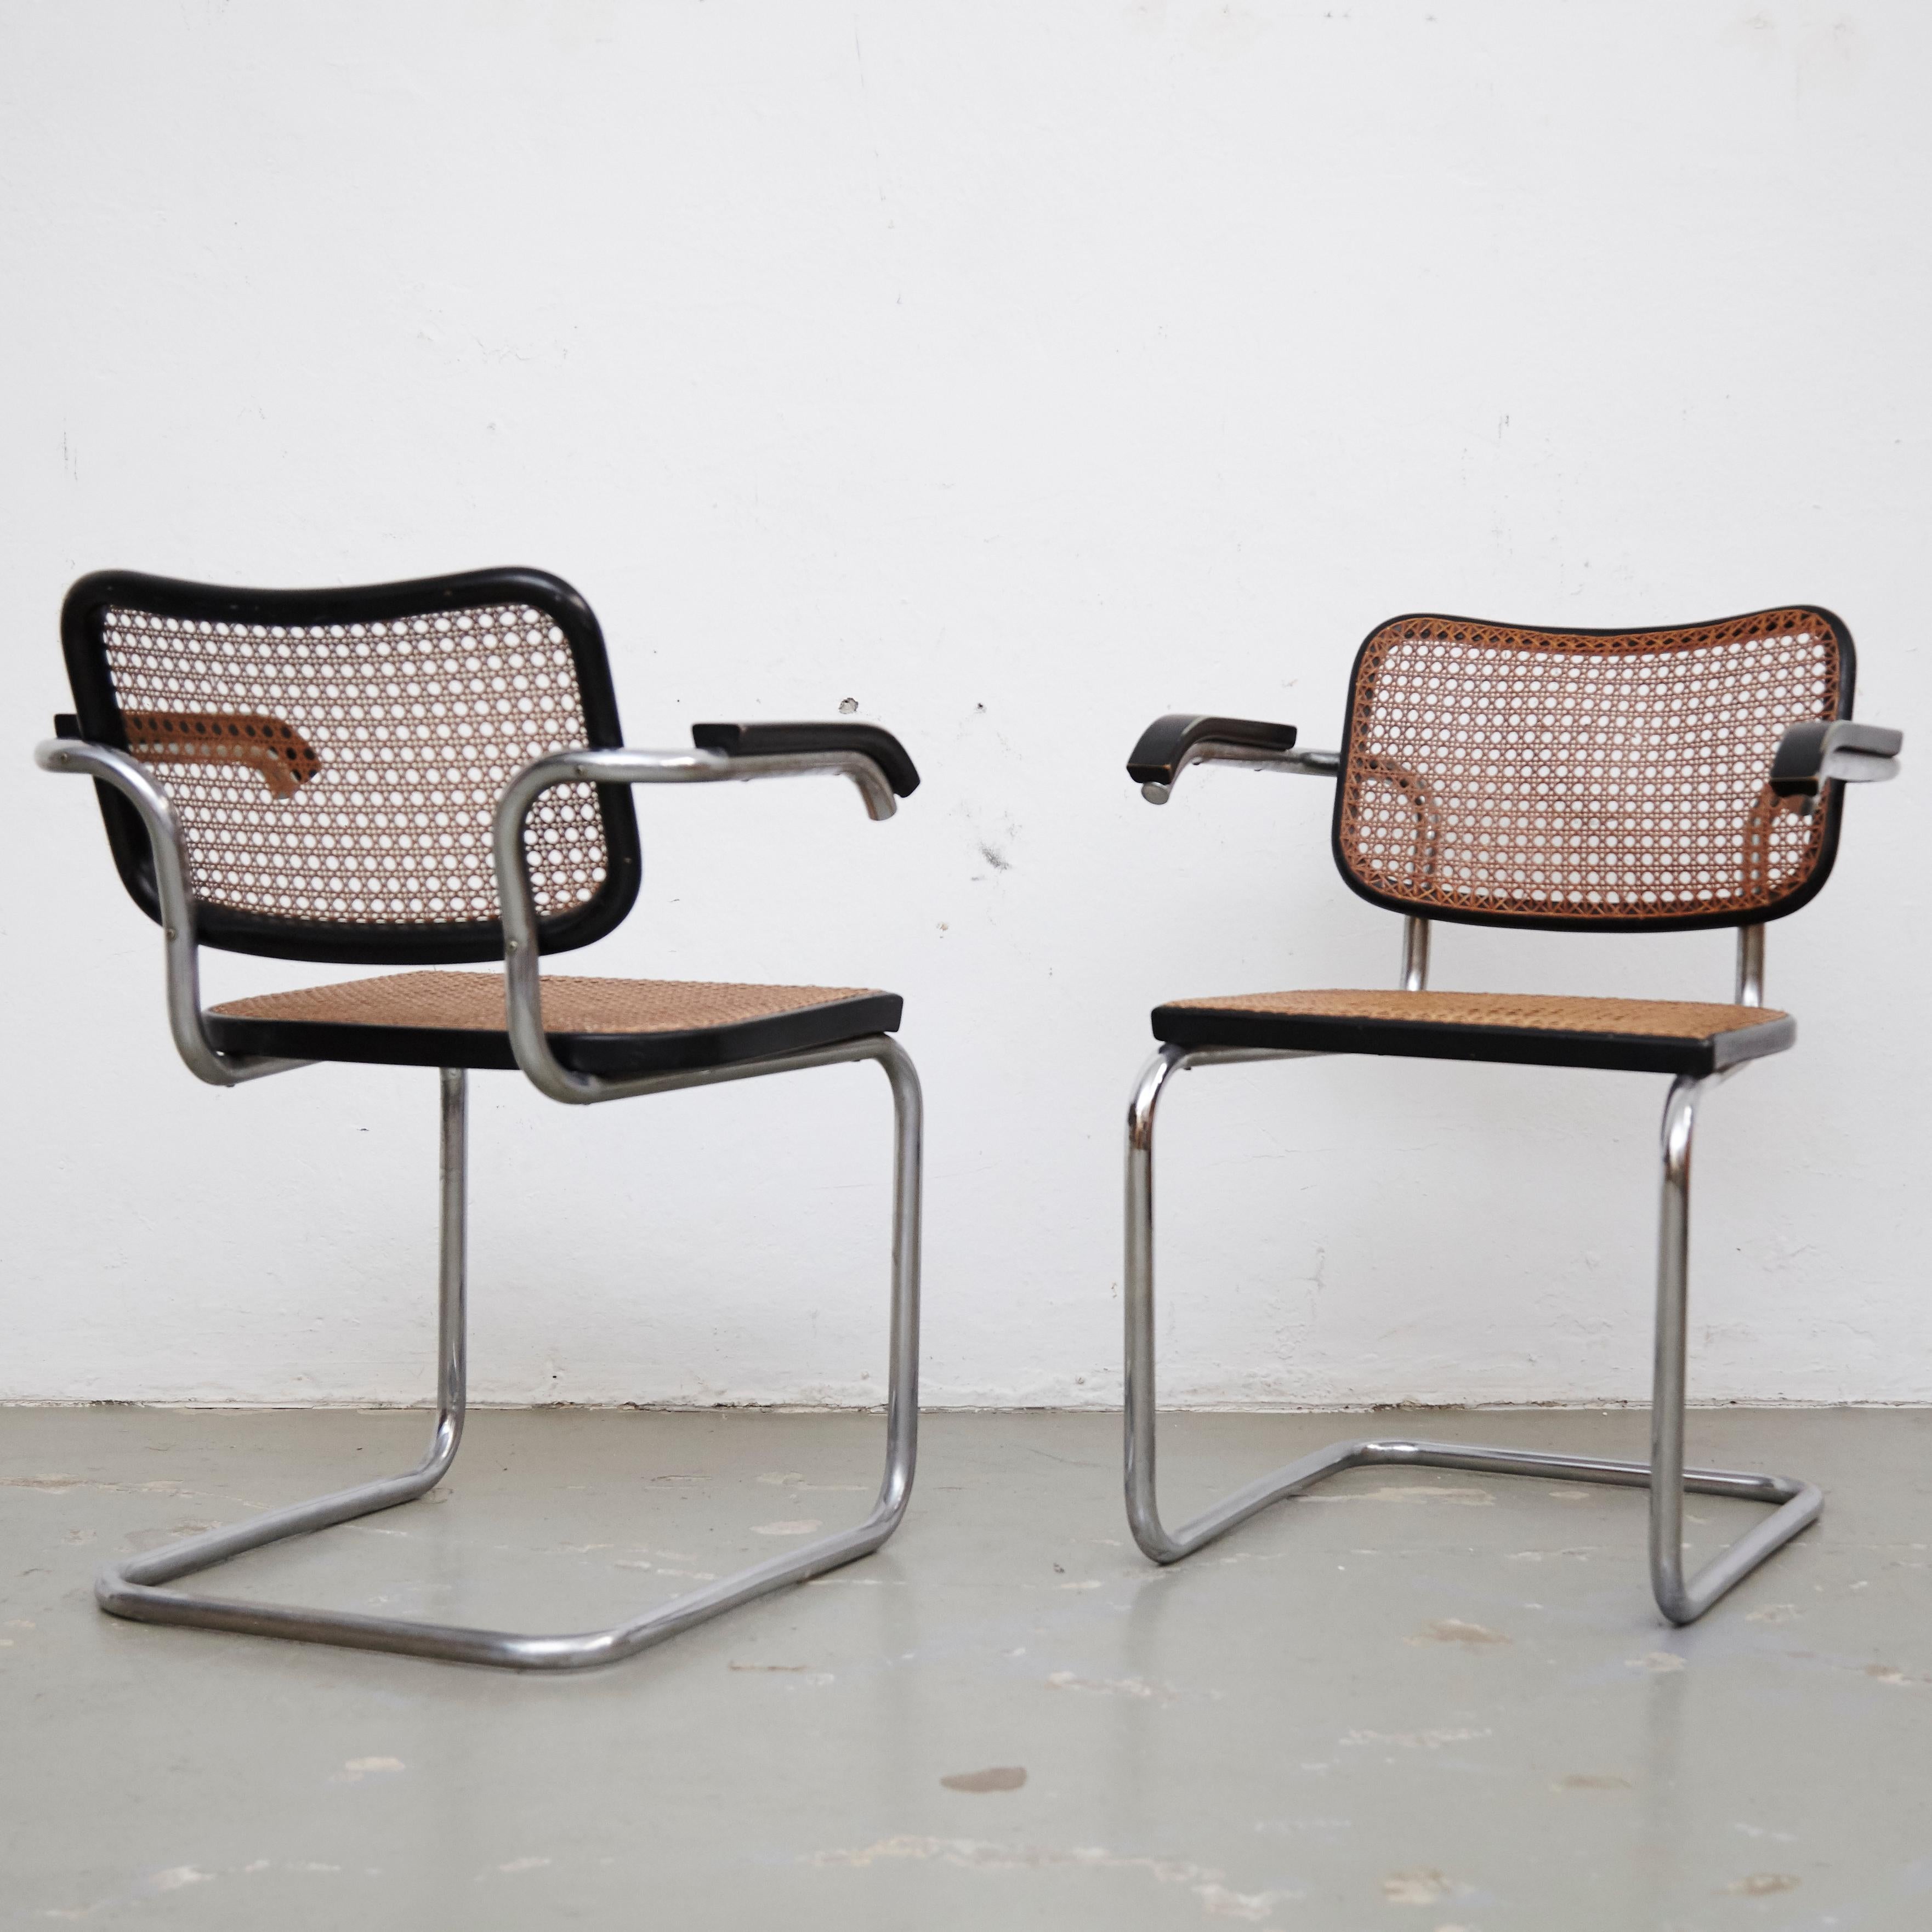 Chairs, model Cesca, designed by Marcel Breuer.
Manufactured in Italy around 1960 by Gavina manufacturer.

Metal pipe frame, wood seat and back structure and rattan.

In good original condition, with minor wear consistent with age and use,